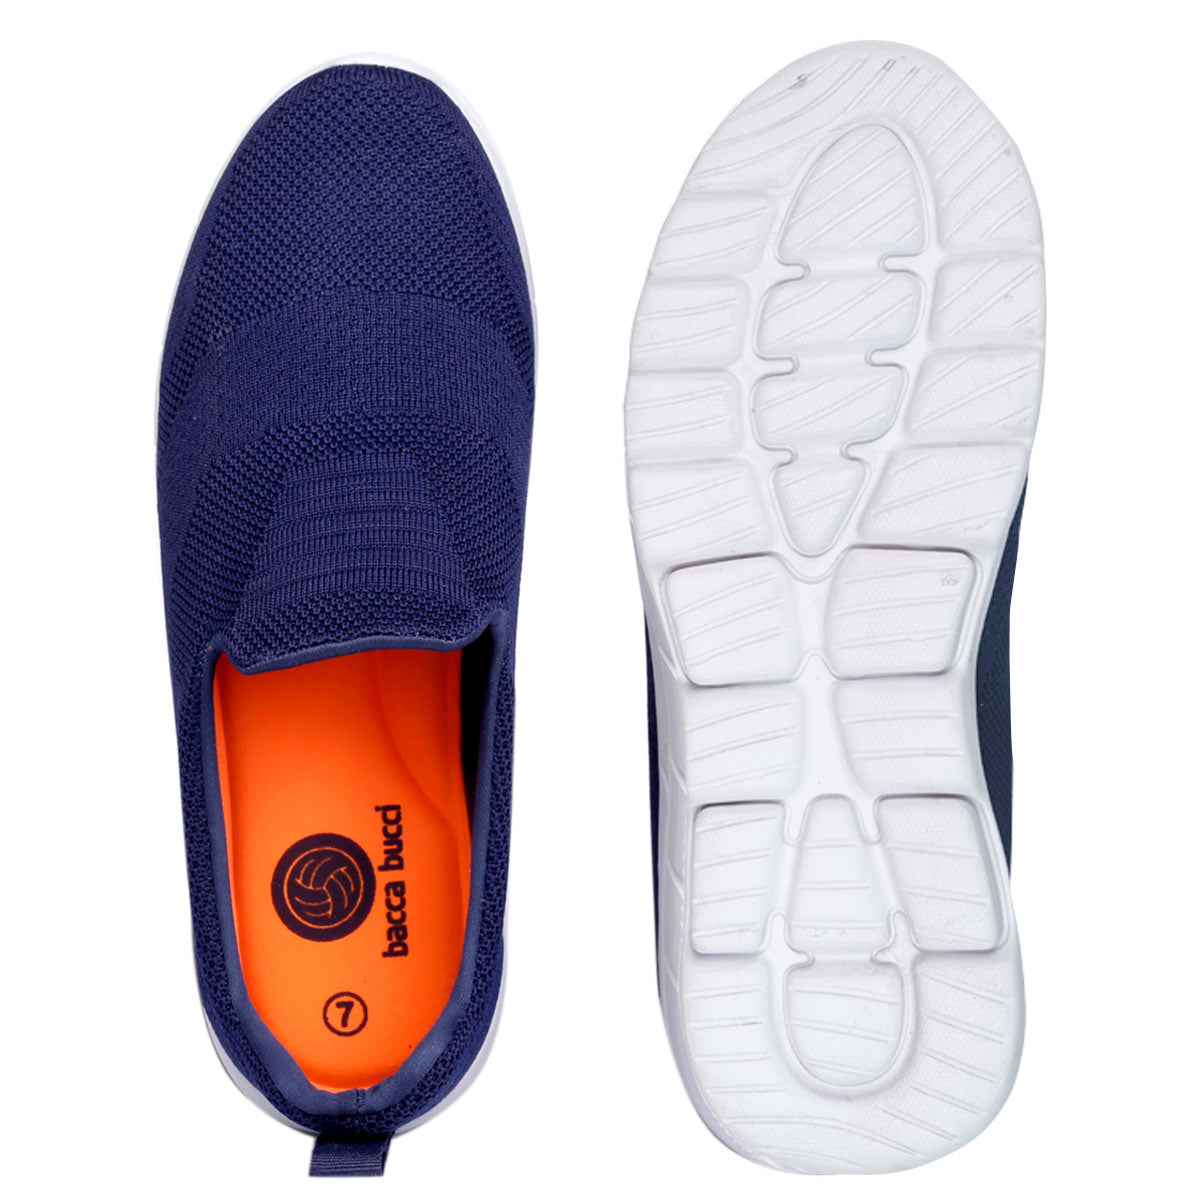 Bacca Bucci CUB Knitted Walking Jogger | Slip-on Shoes for Men